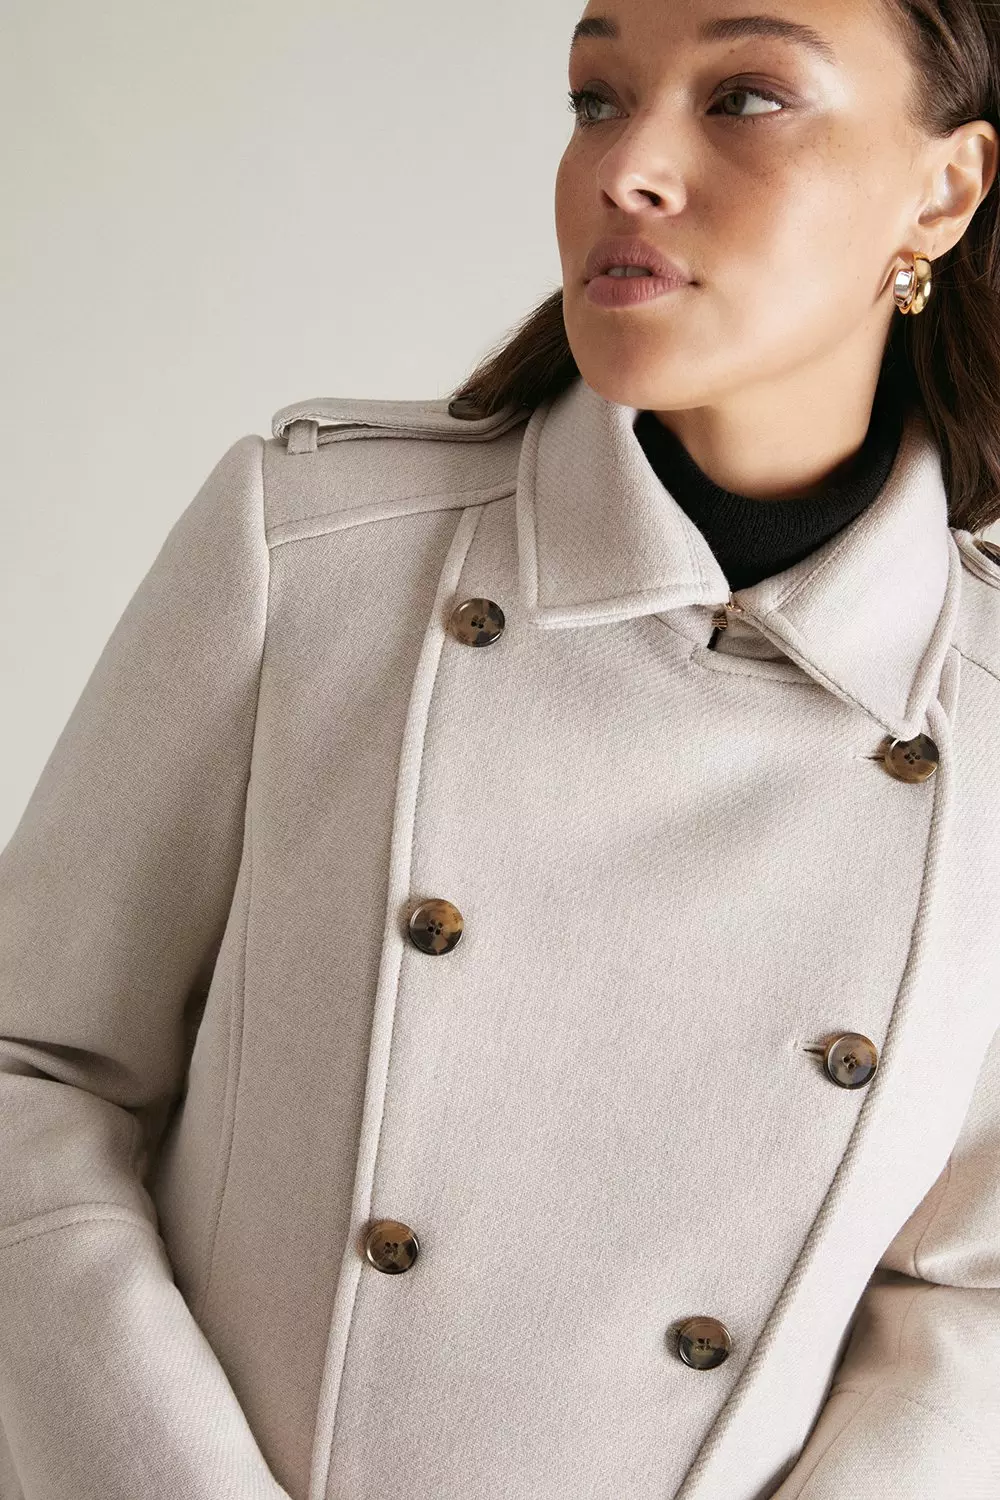 Plus Size Italian Wool Double Breasted Tailored Coat